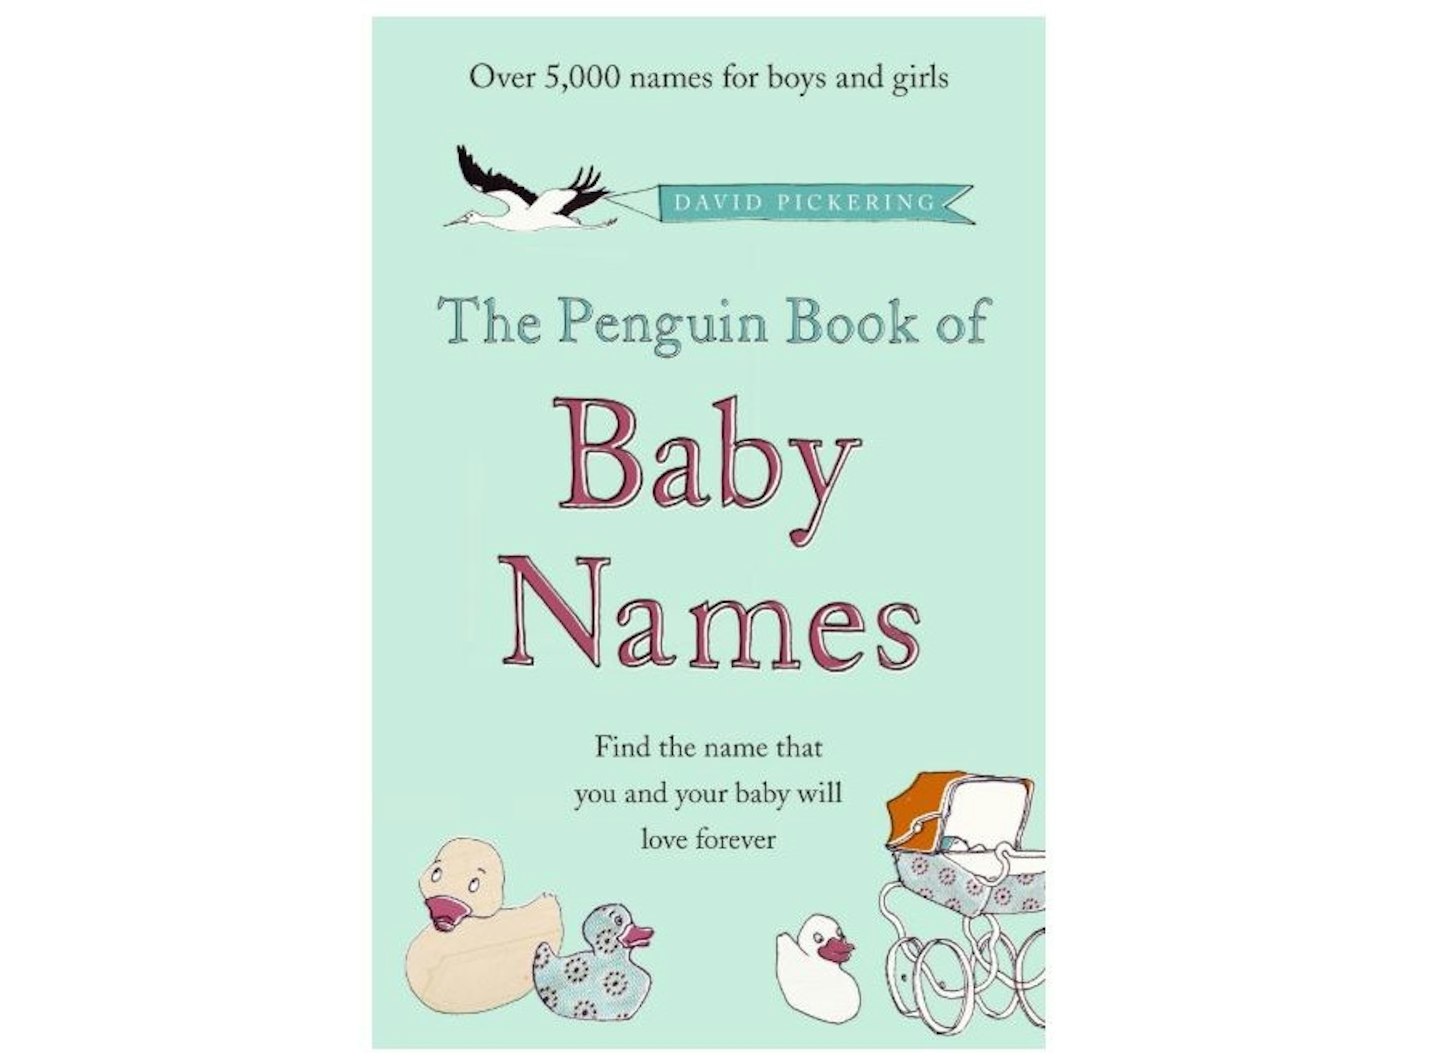 The Penguin Book of Baby Names, £4.87